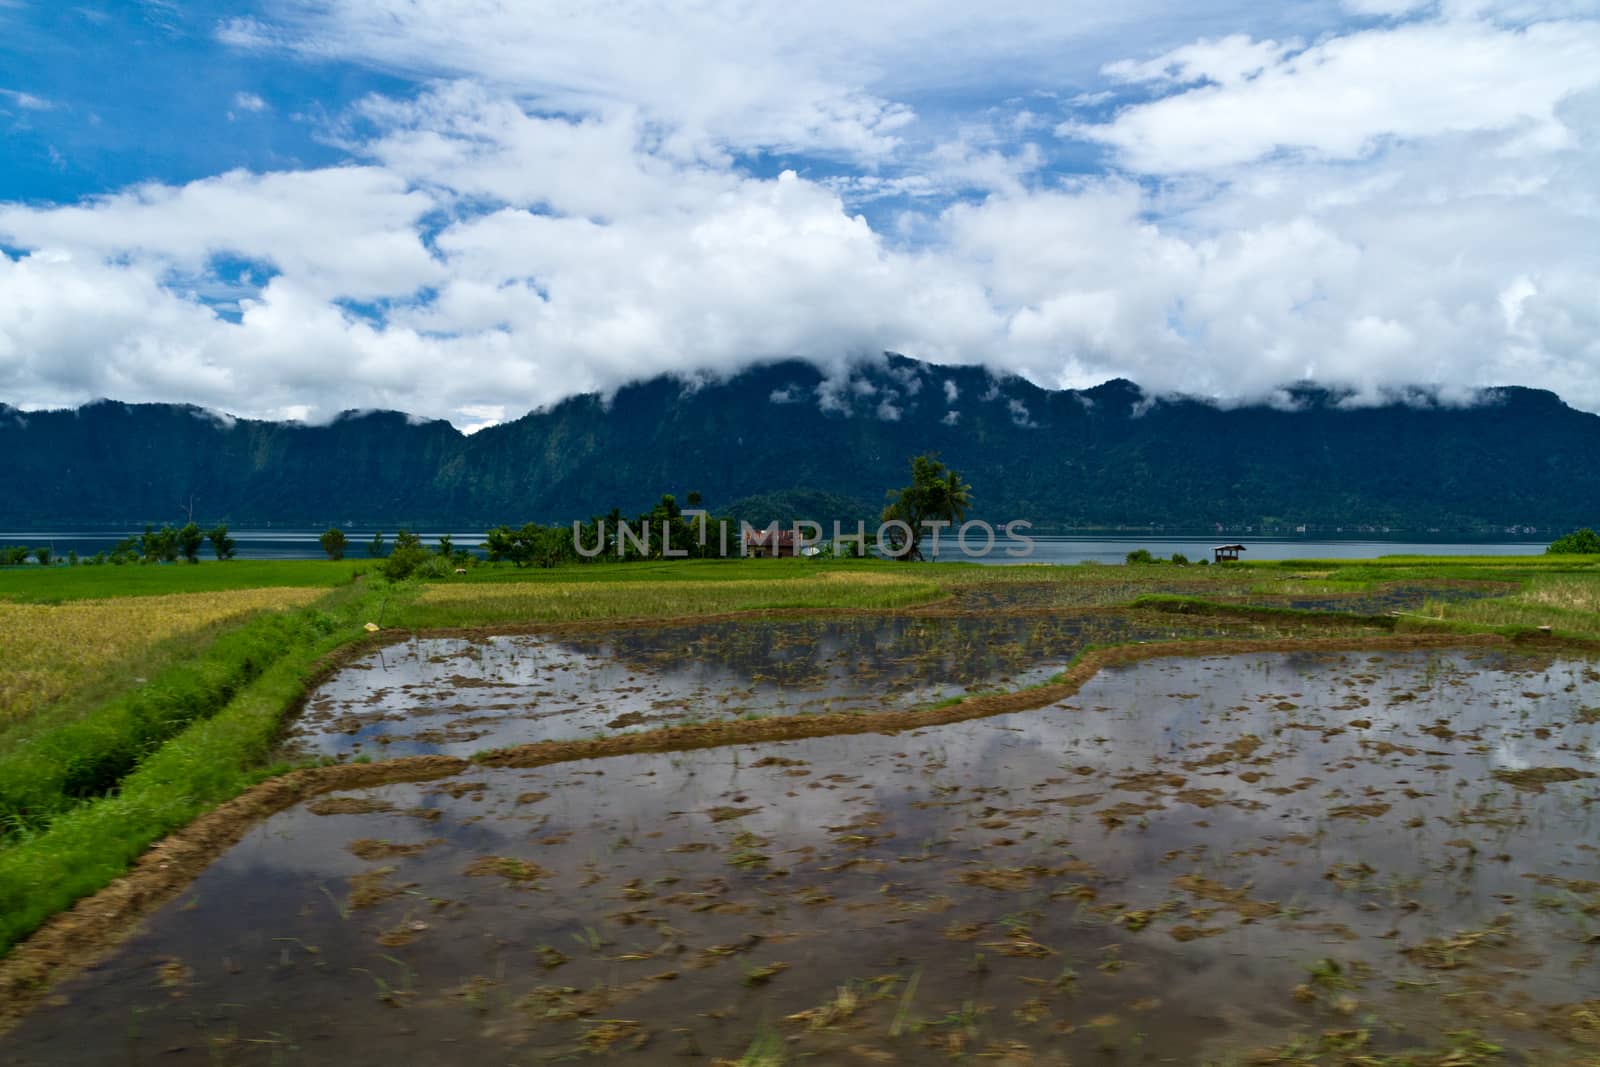 Paddyfield by the lake with mountains in the background